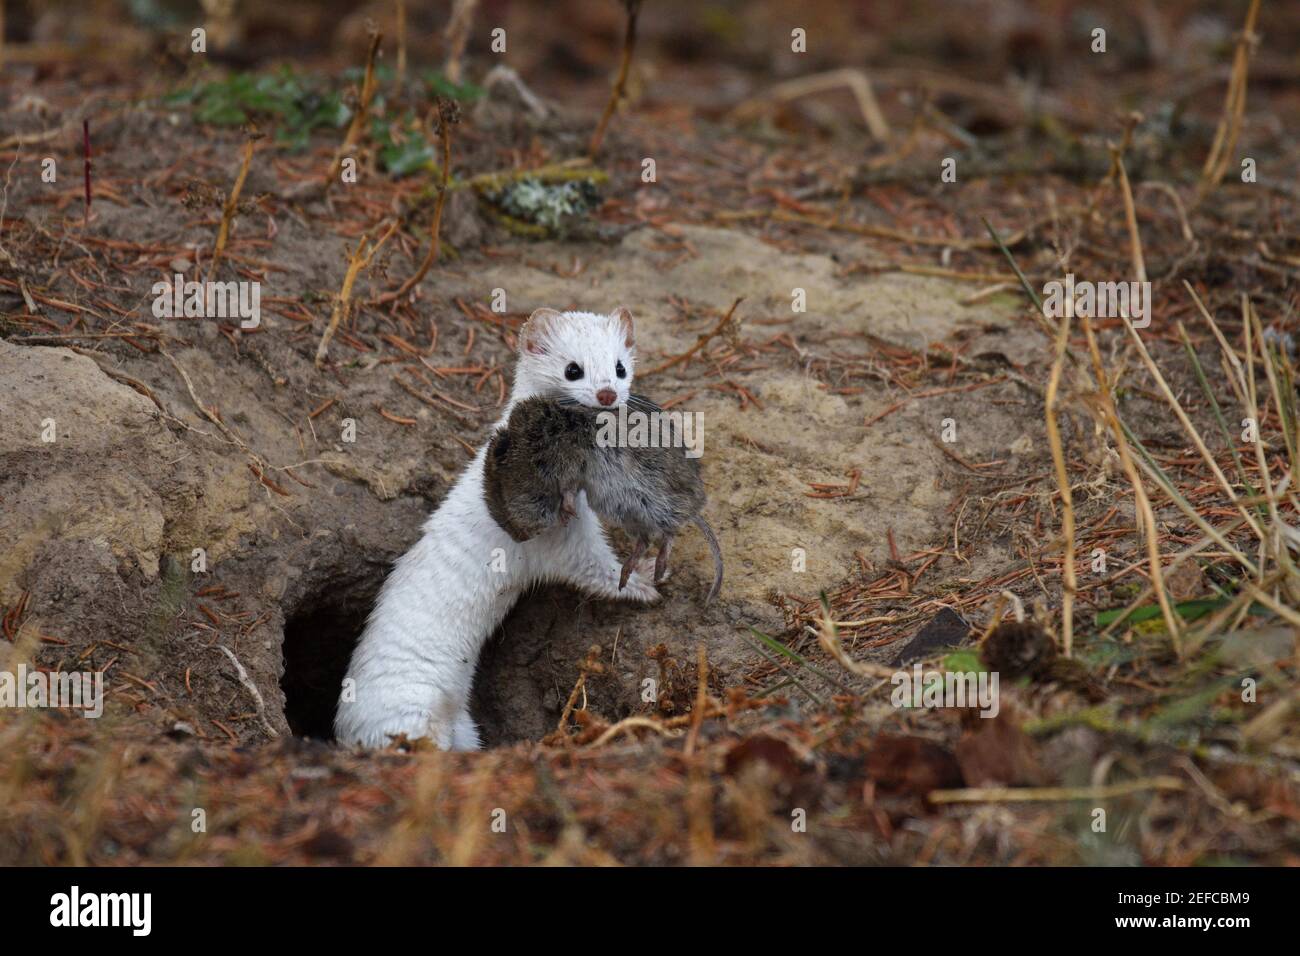 Short-tailed weasel with a vole it is caching in an old ground squirrel burrow in fall. Yaak Valley, northwest Montana. (Photo by Randy Beacham) Stock Photo